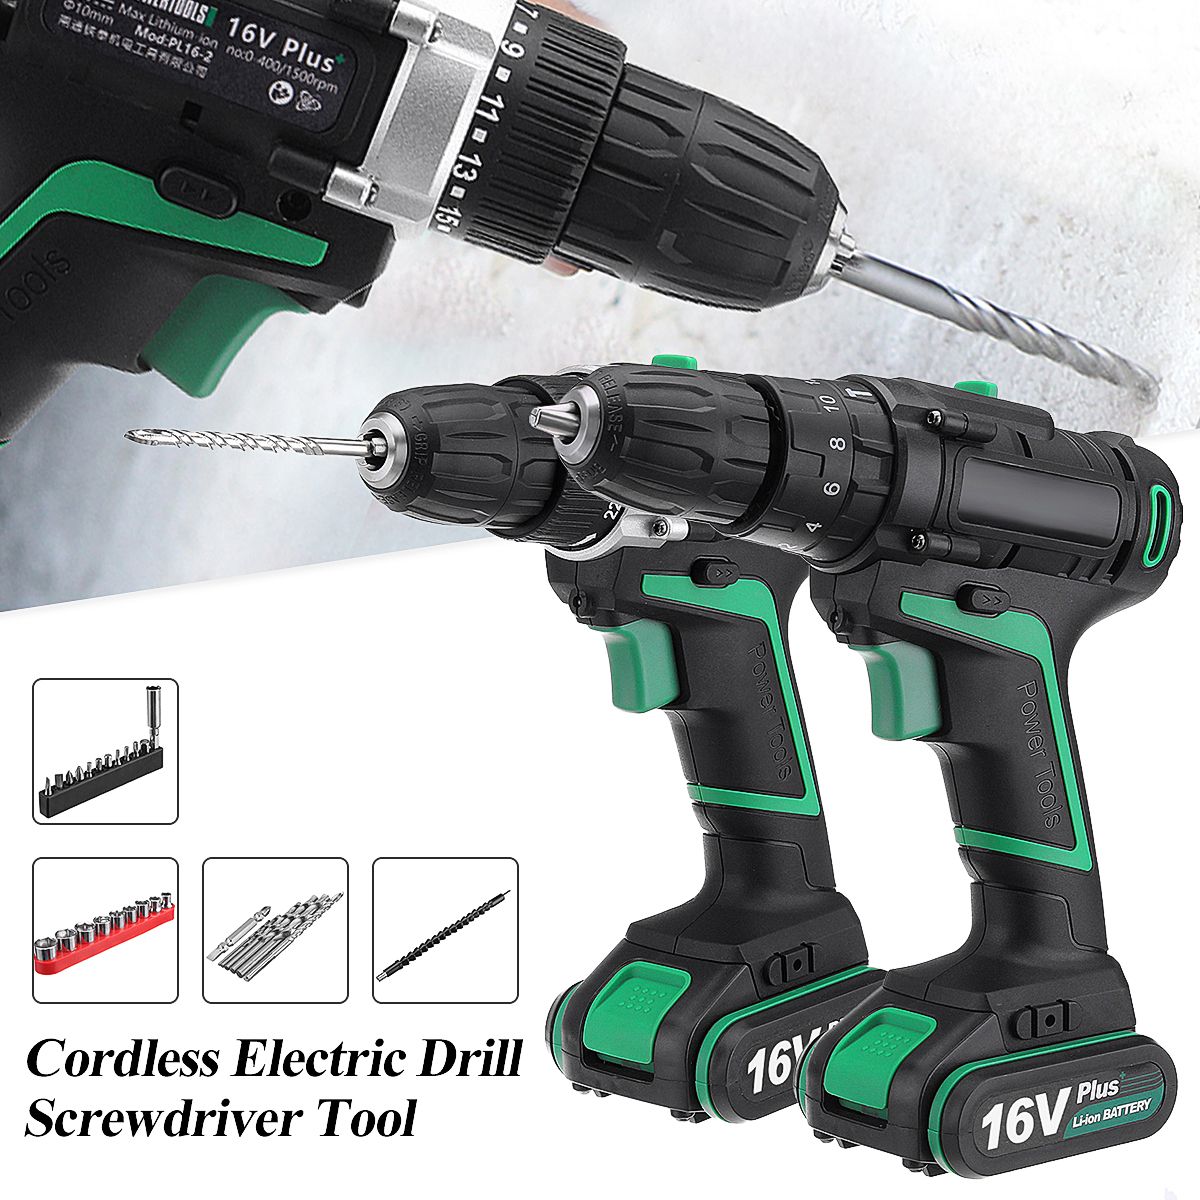 AC-100-240V-Lithium-Cordless-Electric-Screwdriver-Screw-Drill-Driver-Tool-15Ah-1-Charger-1-Battery-1286920